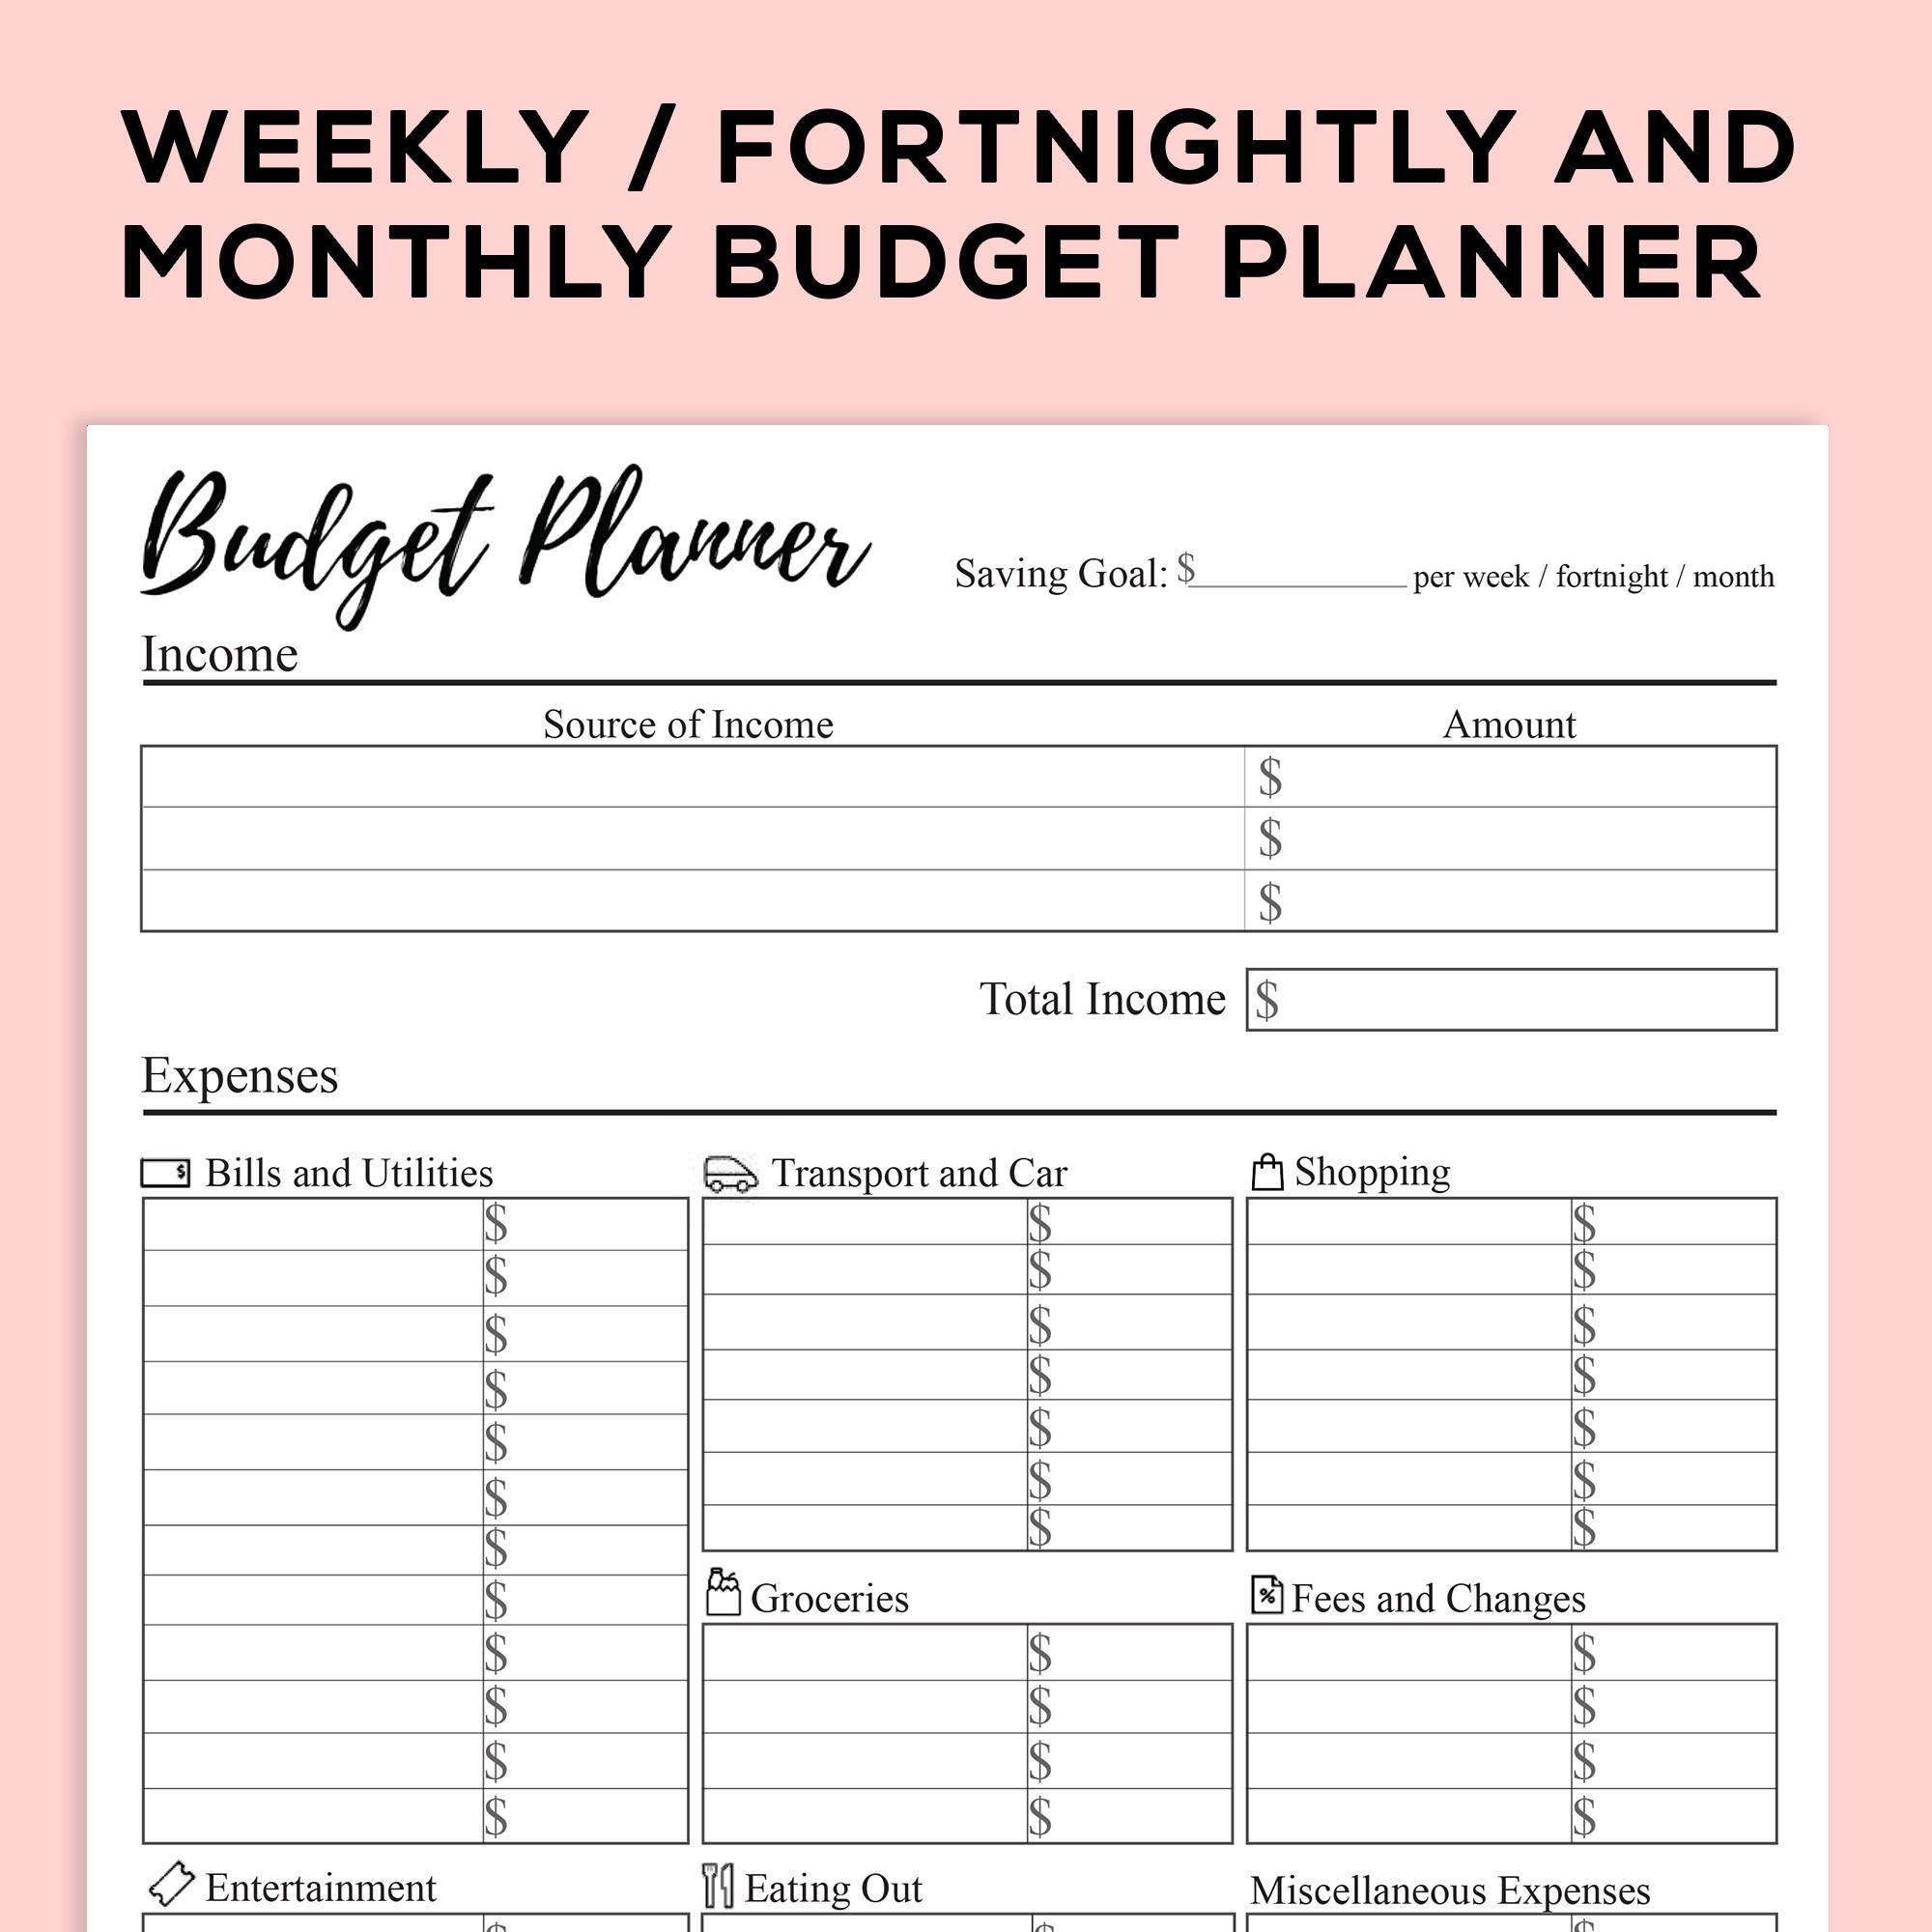 Printable Budget Planner For Weekly Fortnightly And Monthly Etsy sterreich